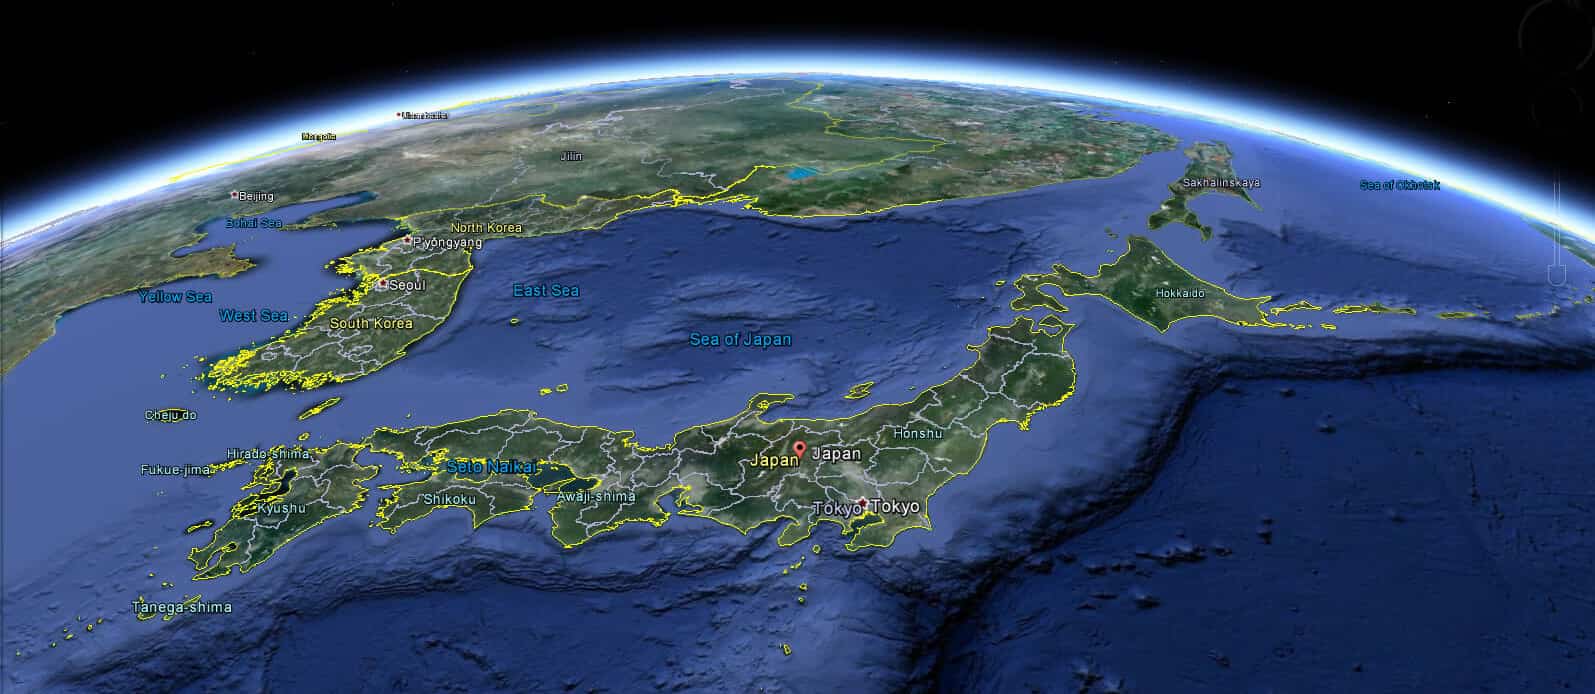 Satellite Map of Japan - Land Of The Rising Son